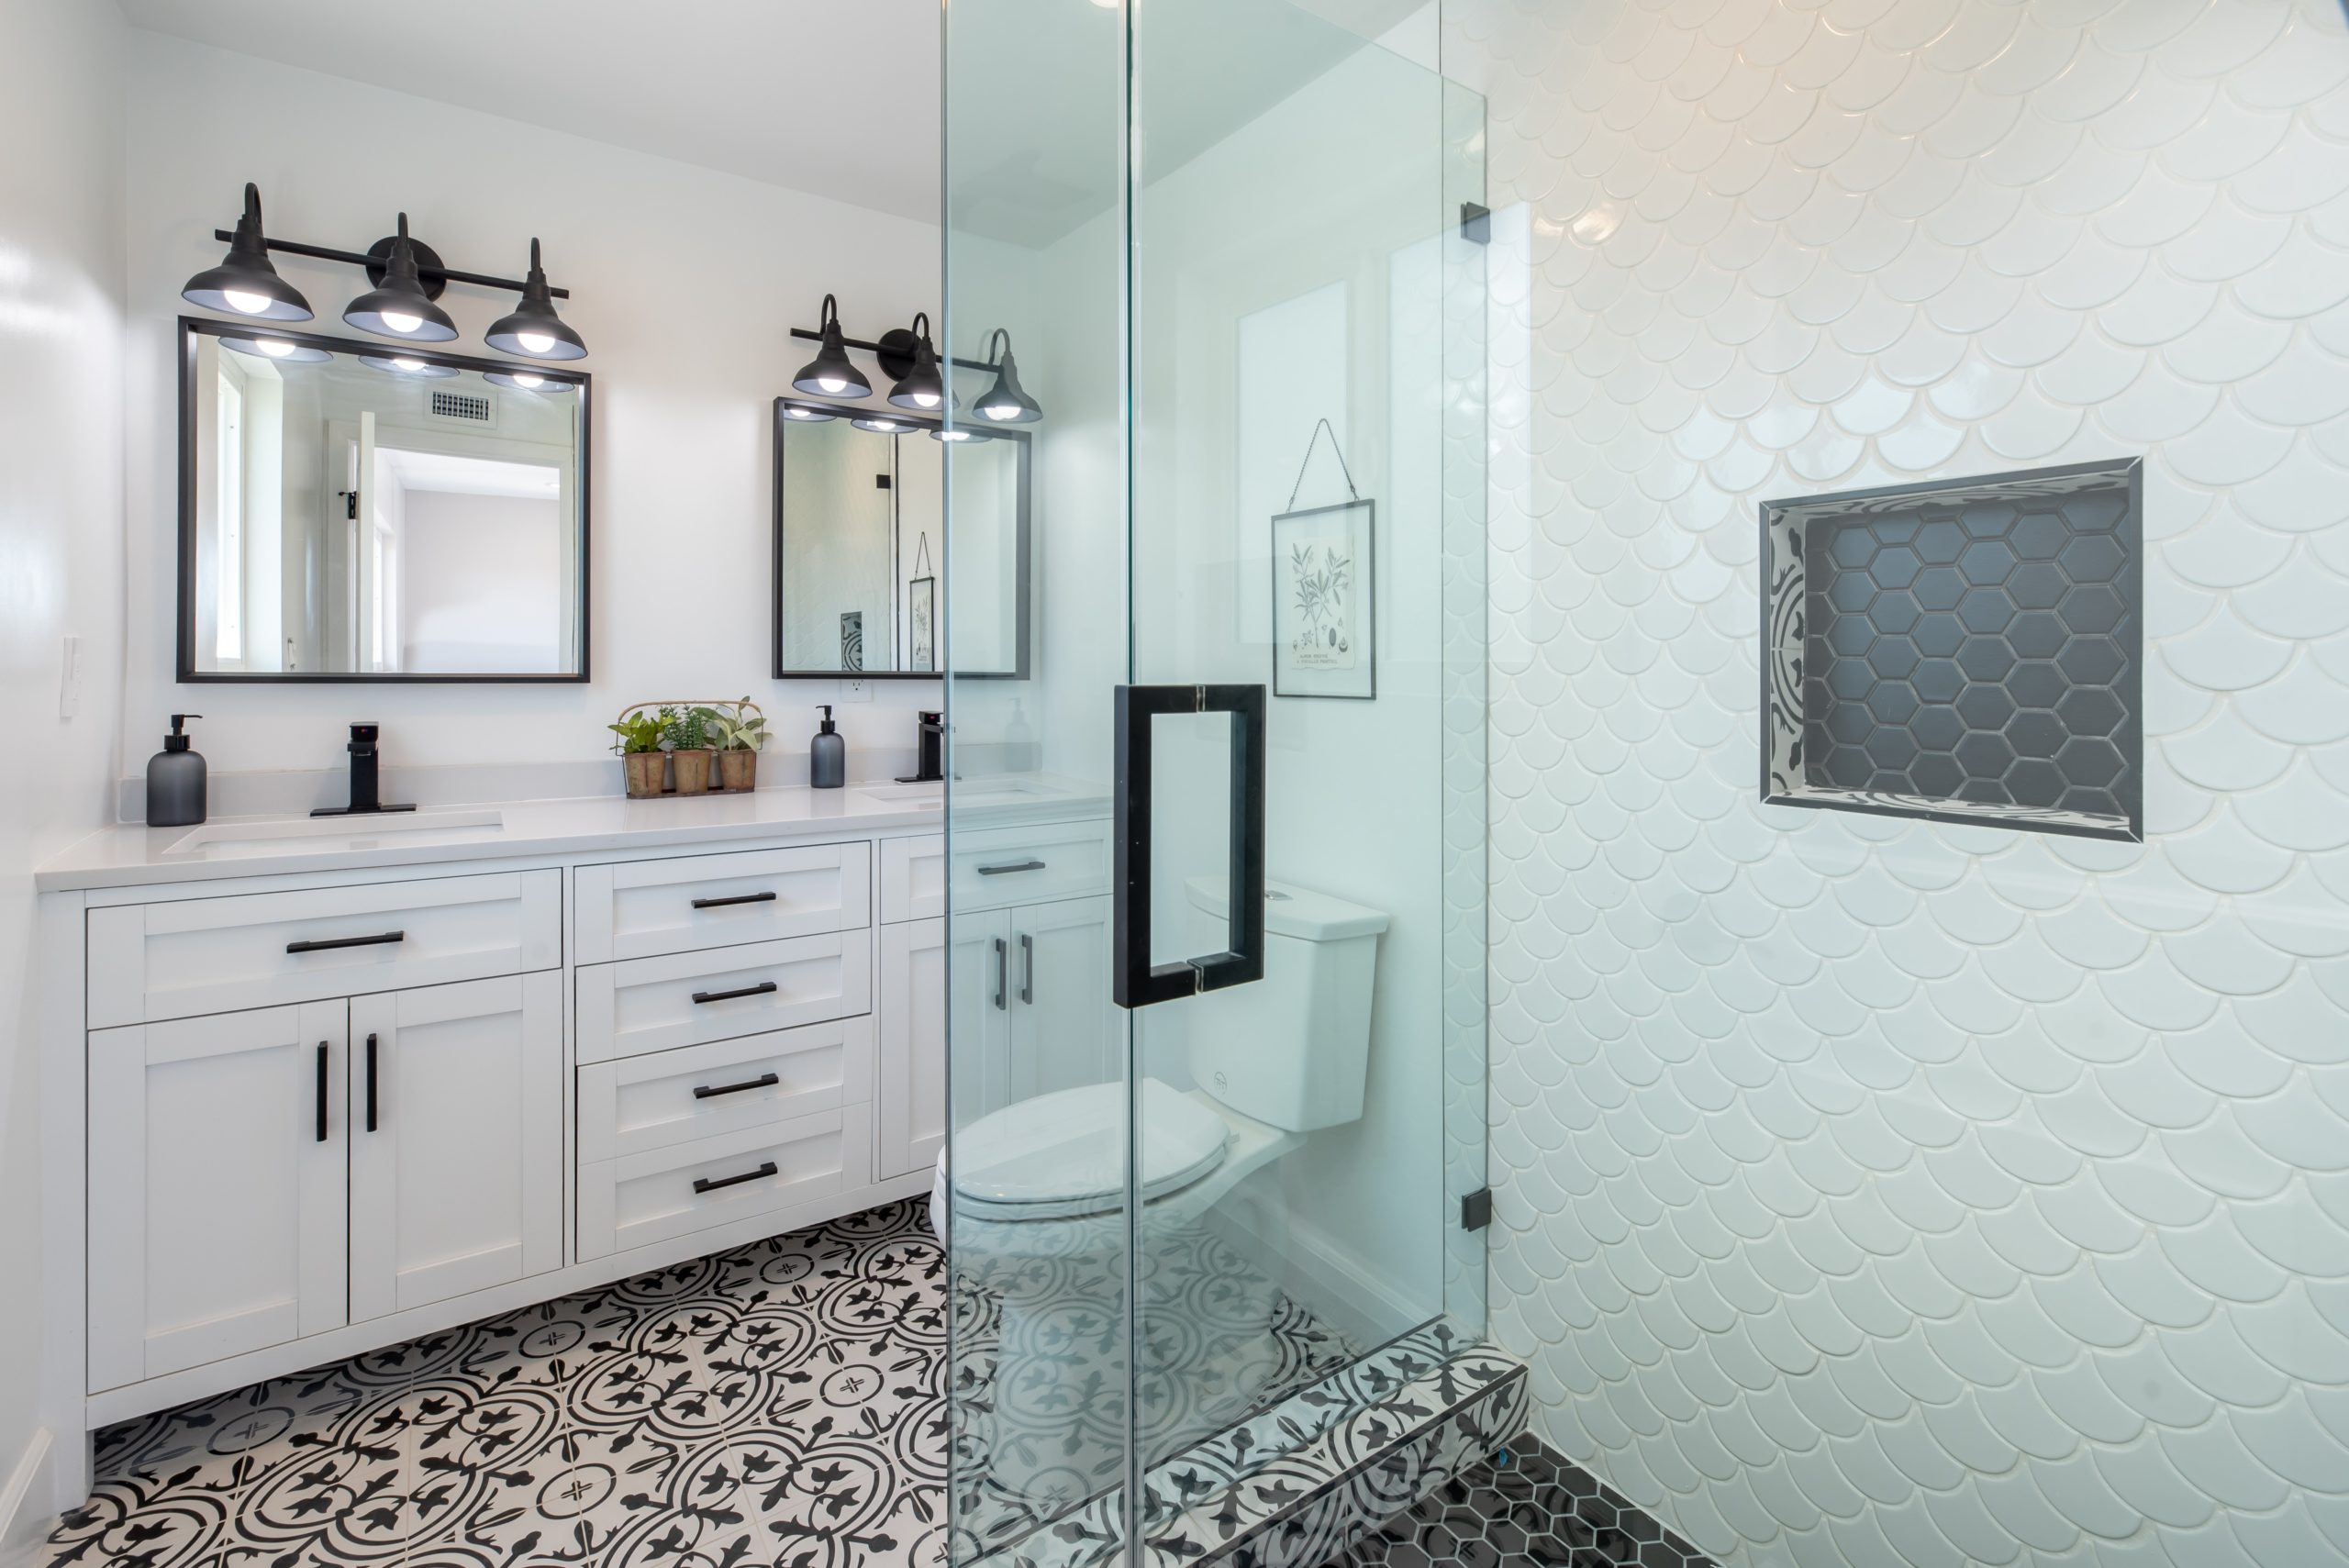 Bathroom remodel ideas for your space